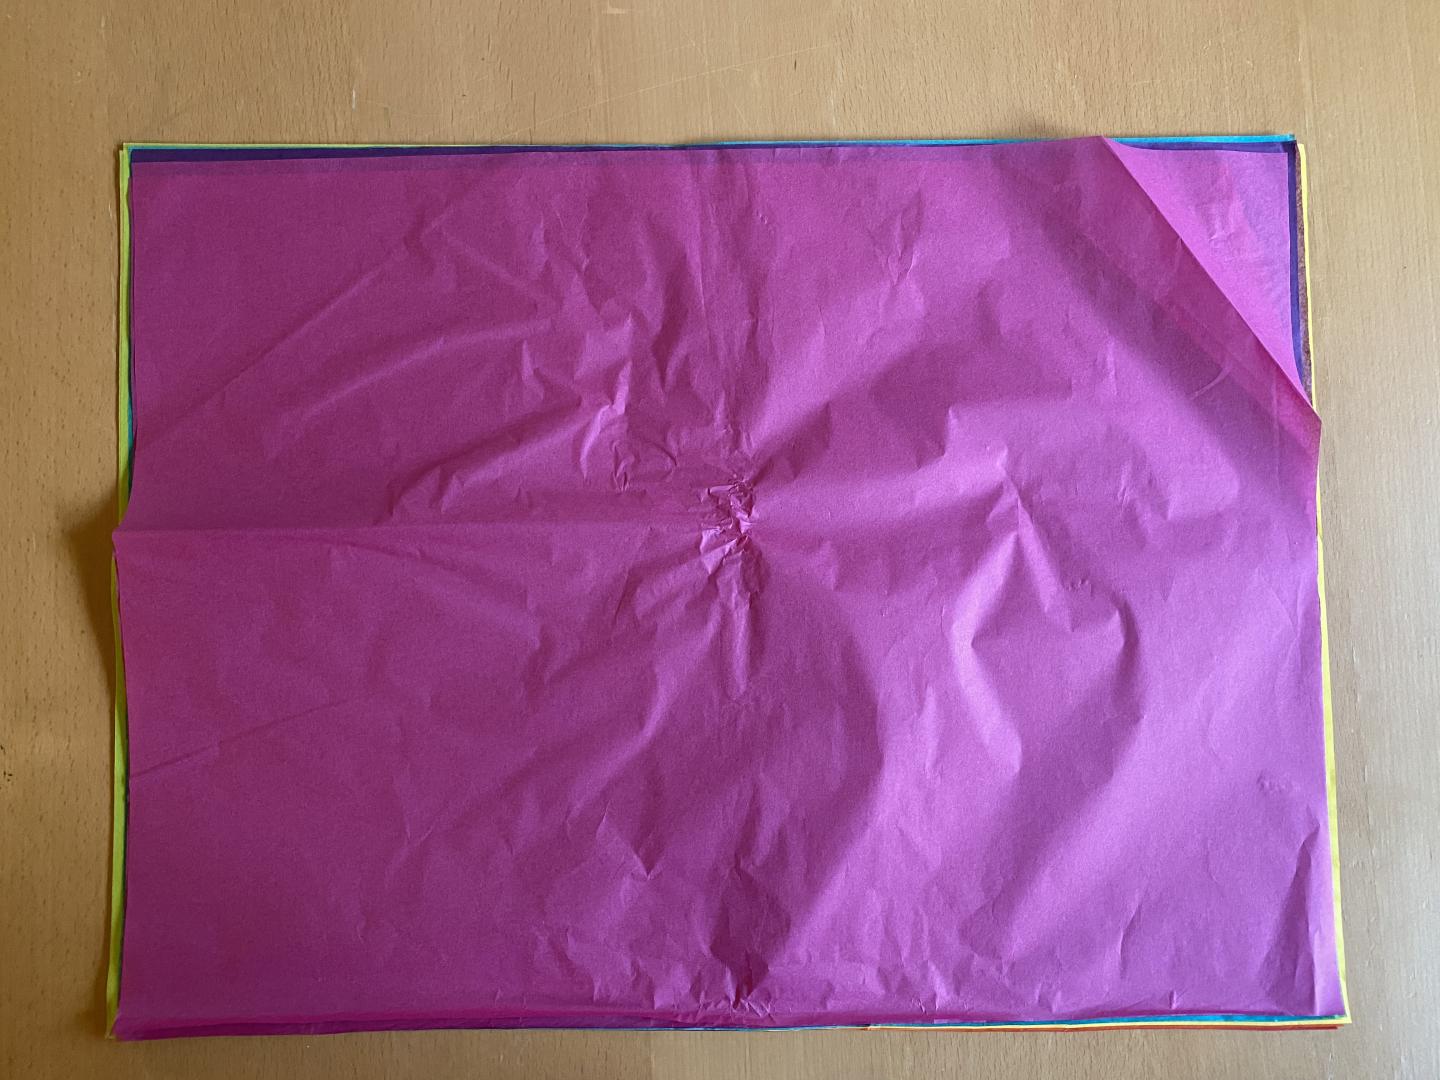 Sheet of pink tissue paper